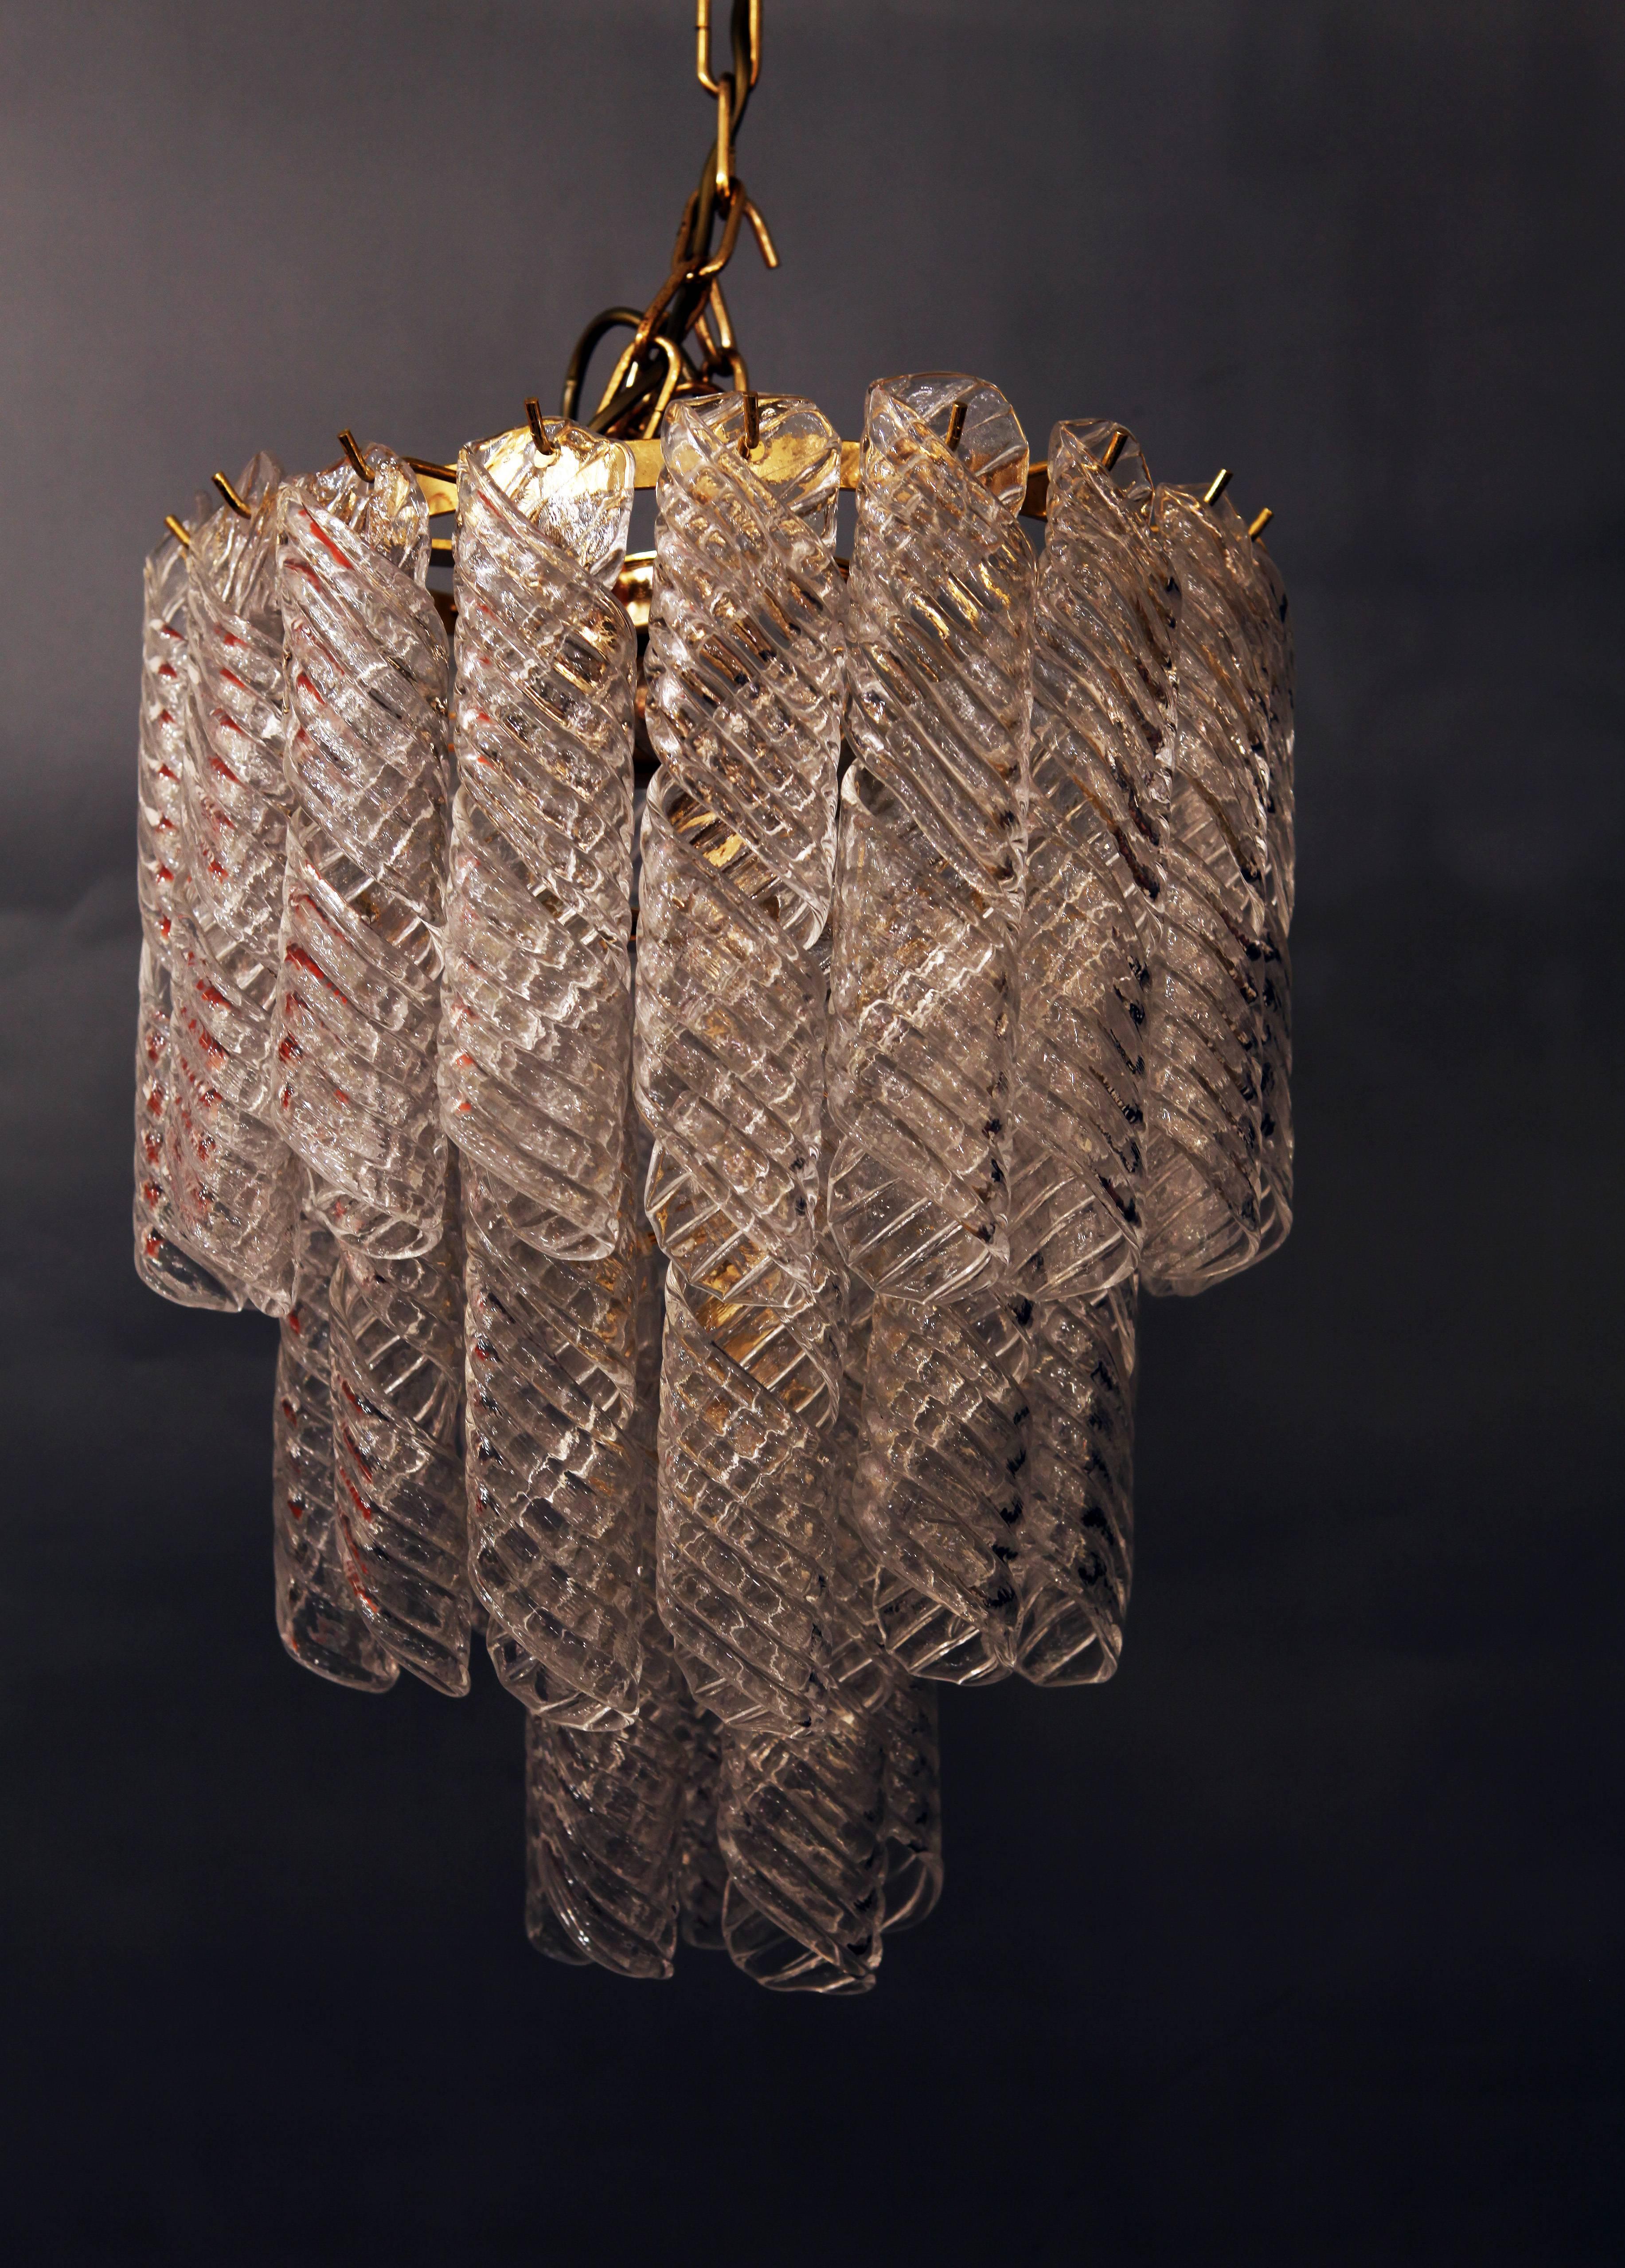 A stunning Italian chandelier made out of 36 pieces of twisted clear Murano glass hanging on a brass fixture.